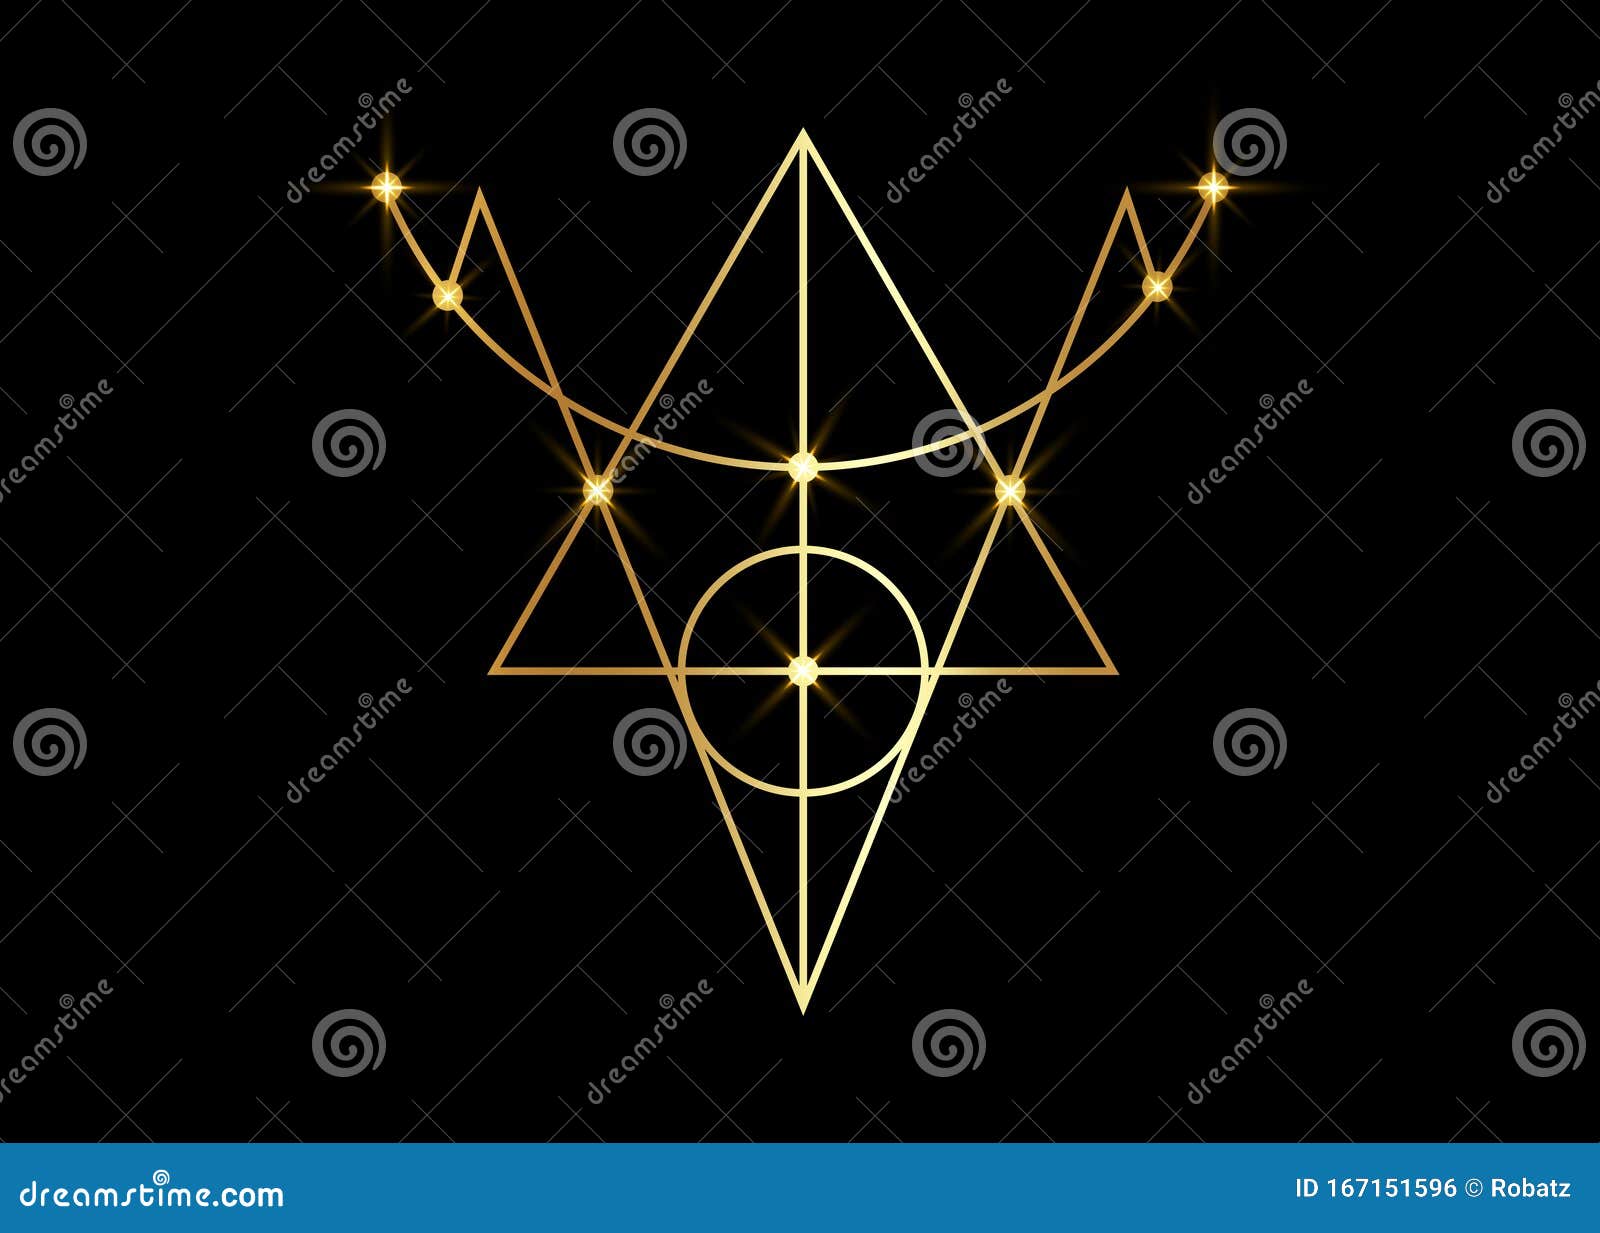 golden sigil of protection. magical amulets. can be used as tattoo, logos and prints. gold wiccan occult , sacred geometry